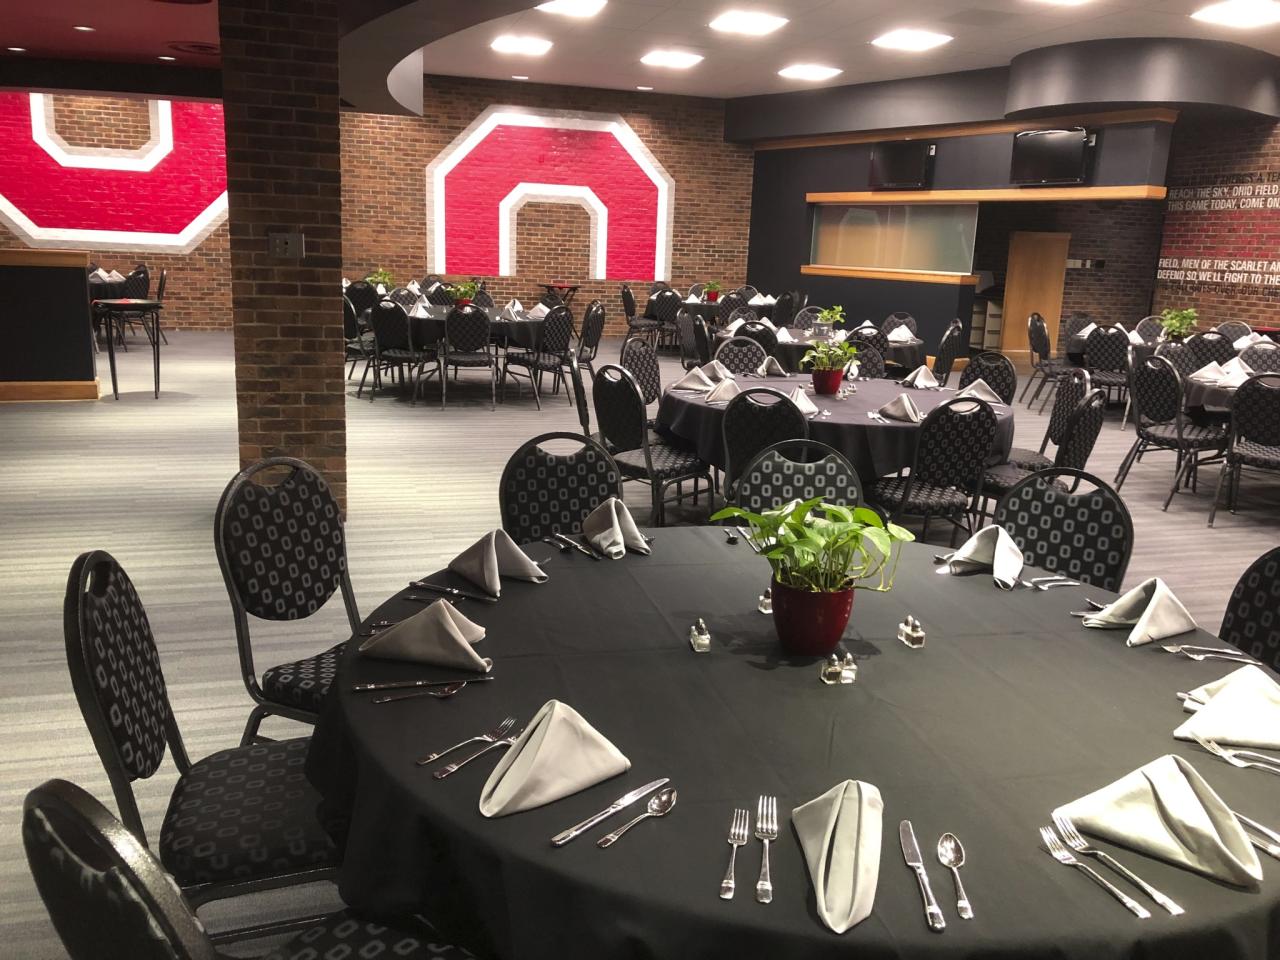 Fawcett Center meeting room decorated for an event